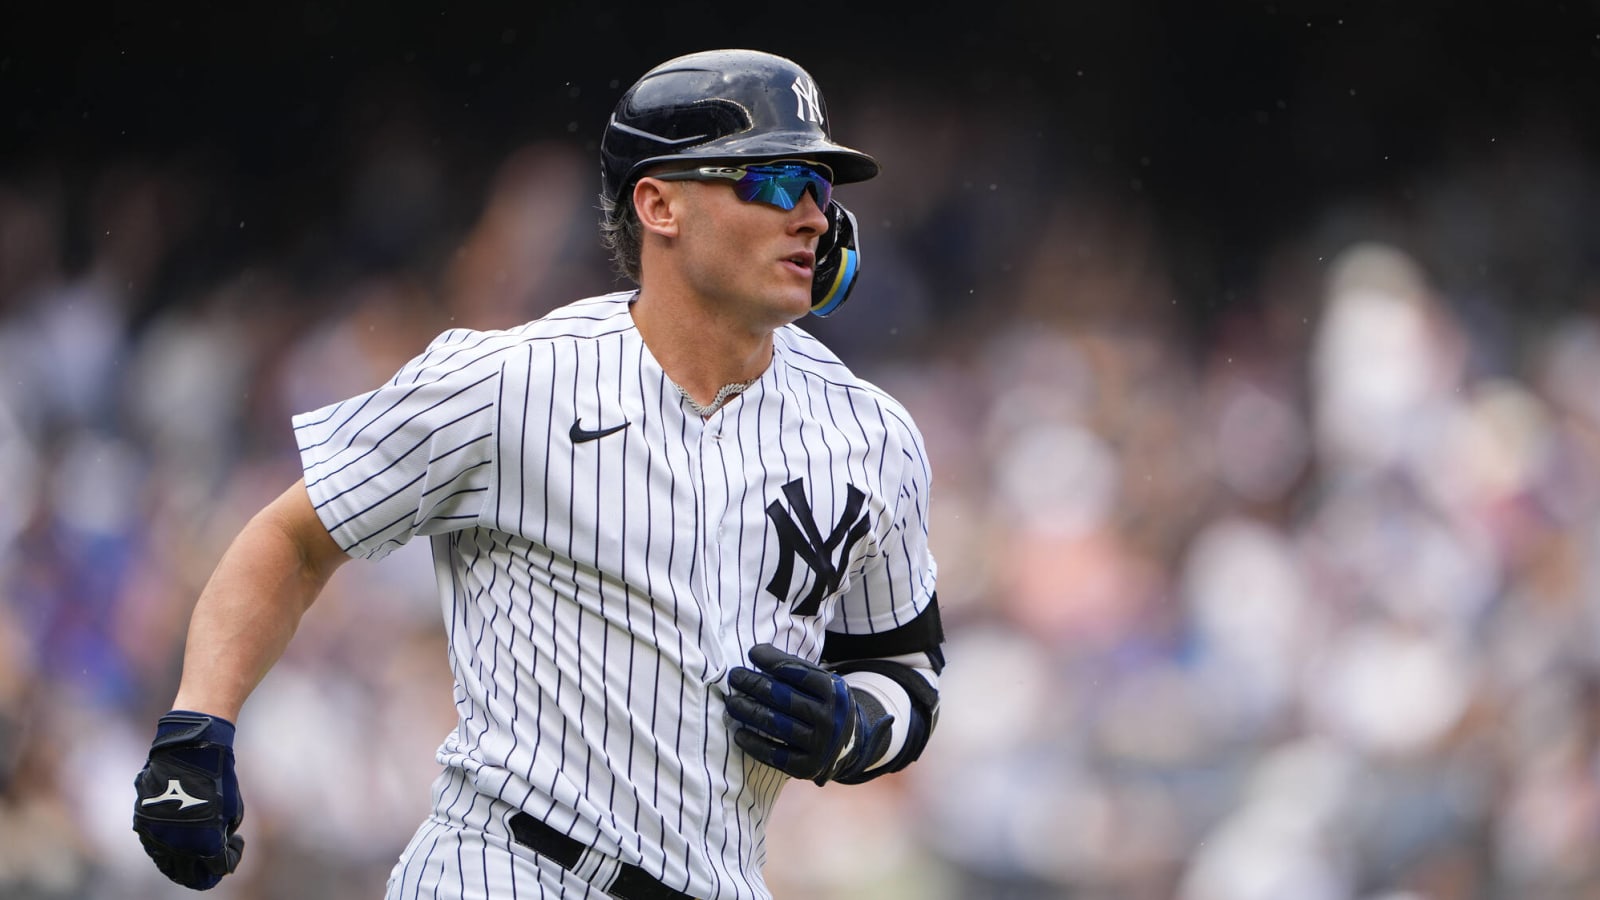 Yankees POTENTIAL TRADE With Mets Josh Donaldson To Mets? Here's Why 